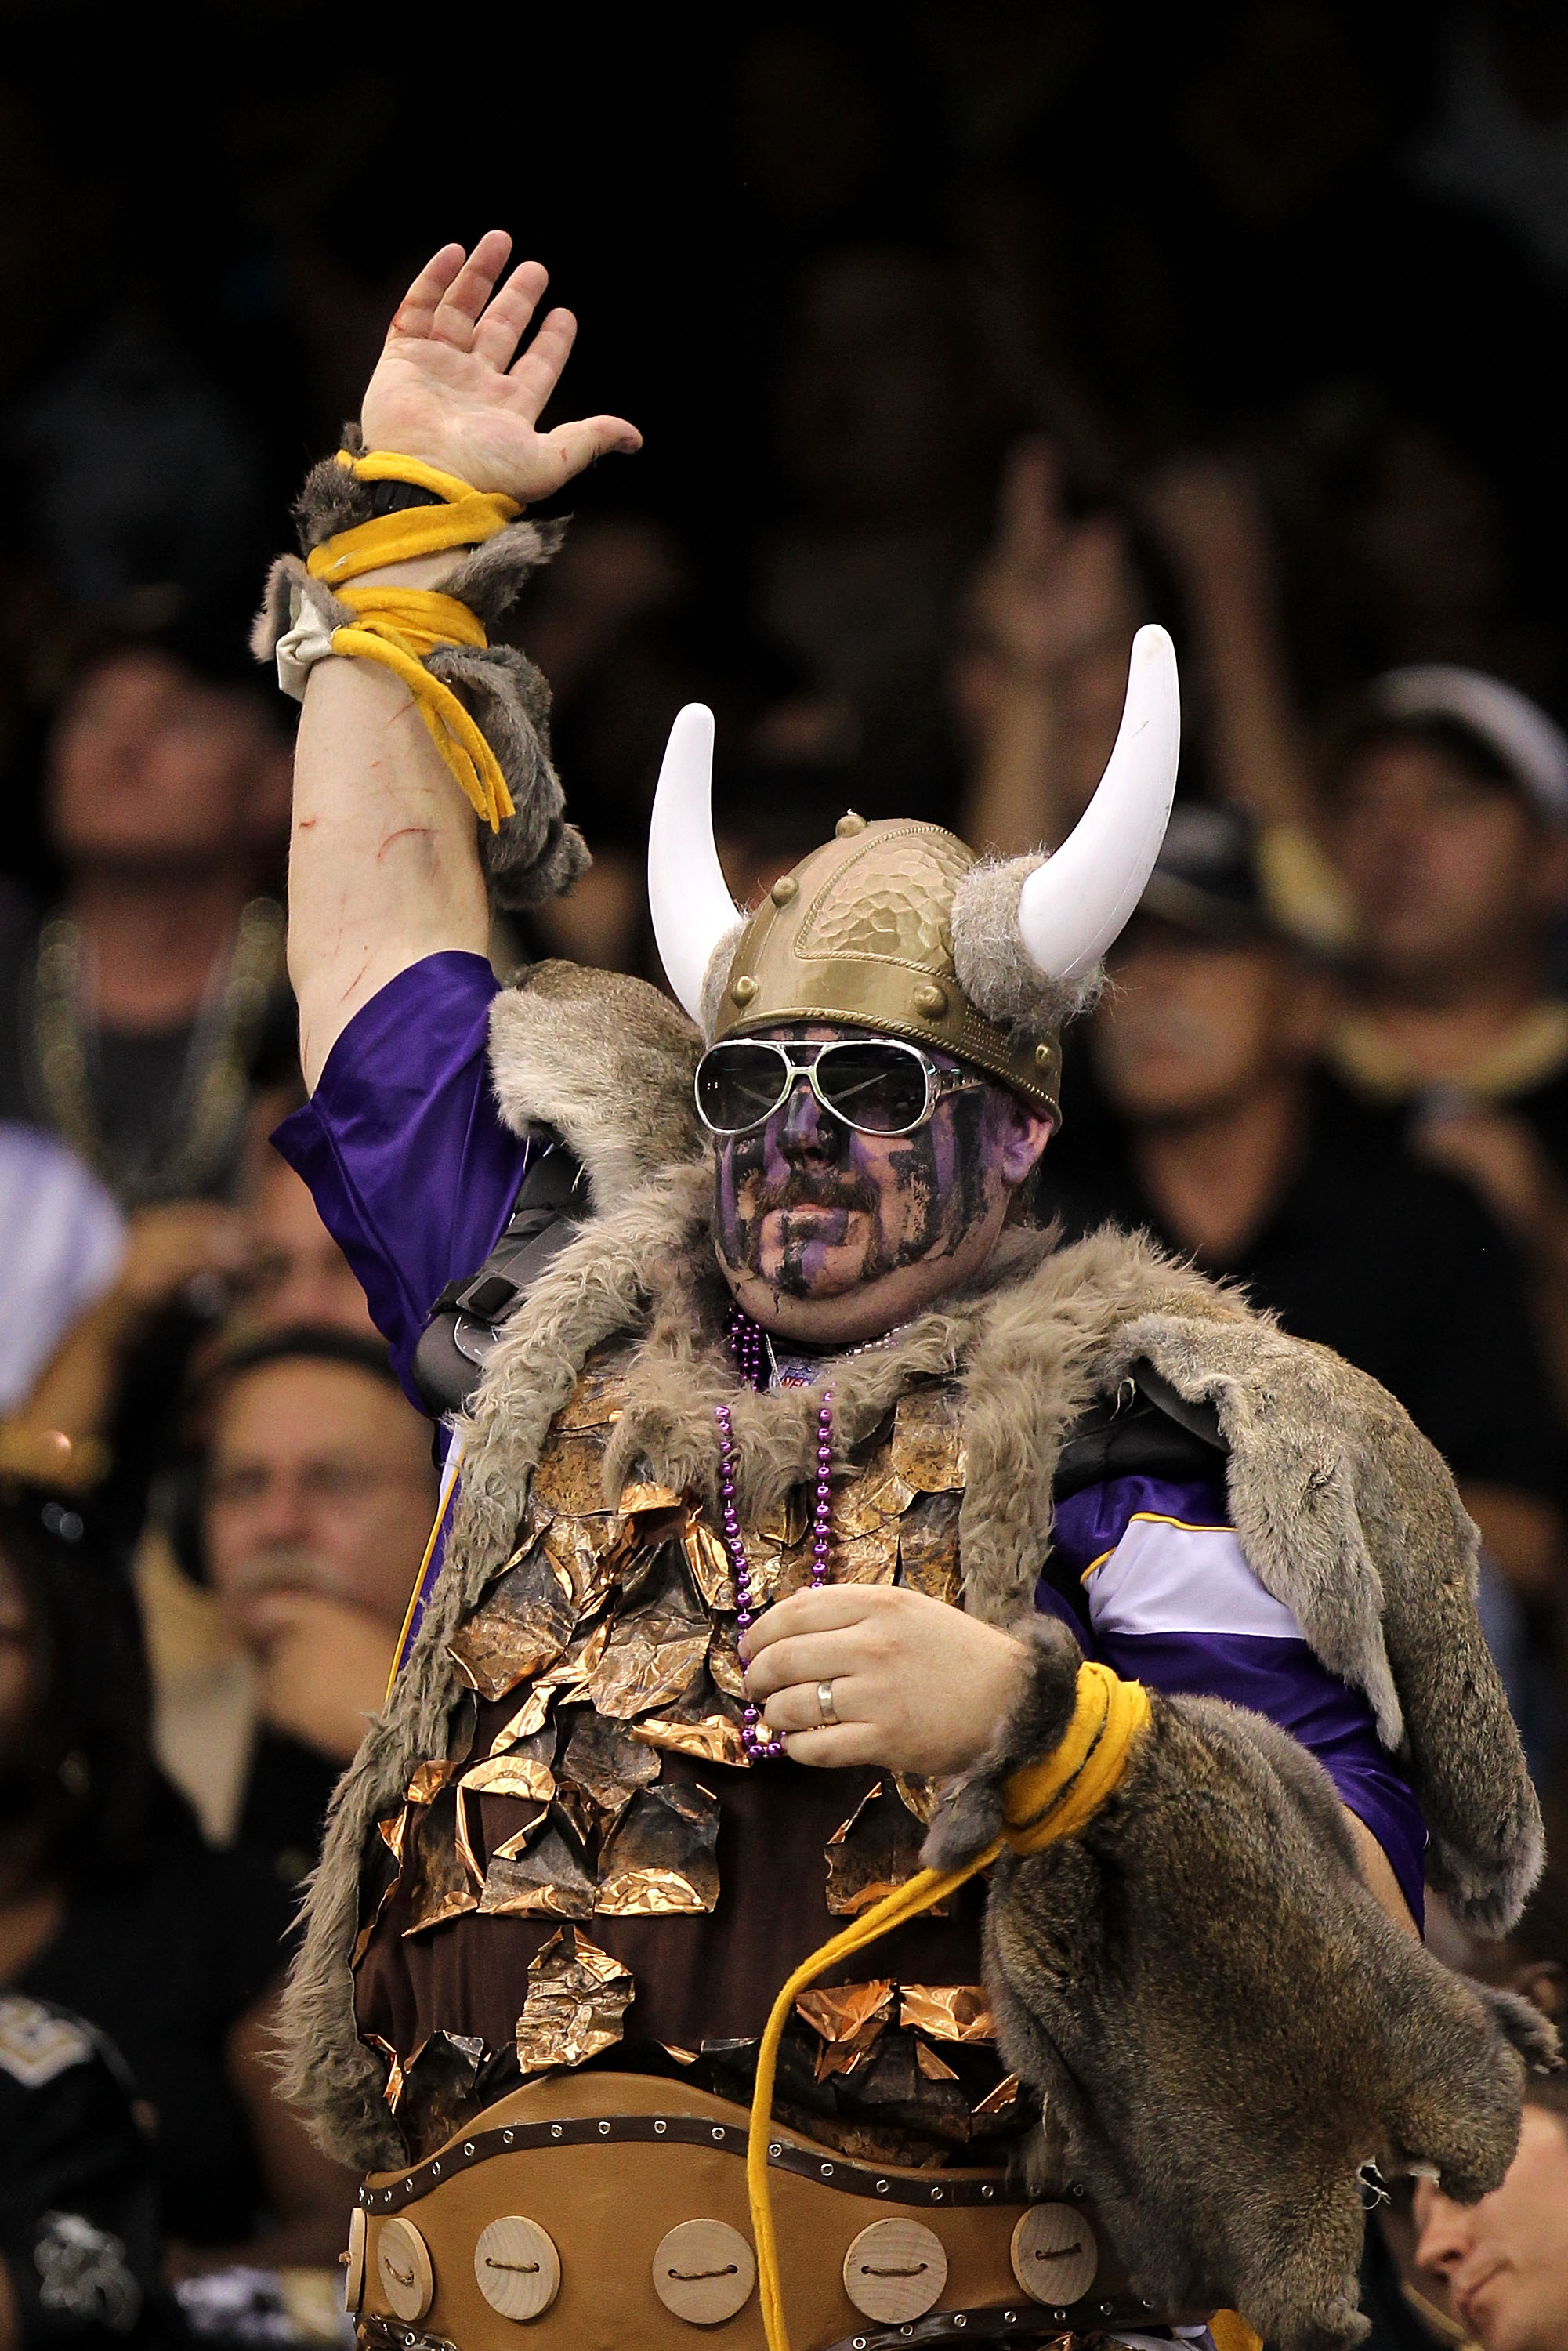 NEW ORLEANS - SEPTEMBER 09:  A fan of the Minnesota Vikings supports his team against the New Orleans Saints at Louisiana Superdome on September 9, 2010 in New Orleans, Louisiana.  (Photo by Ronald Martinez/Getty Images)